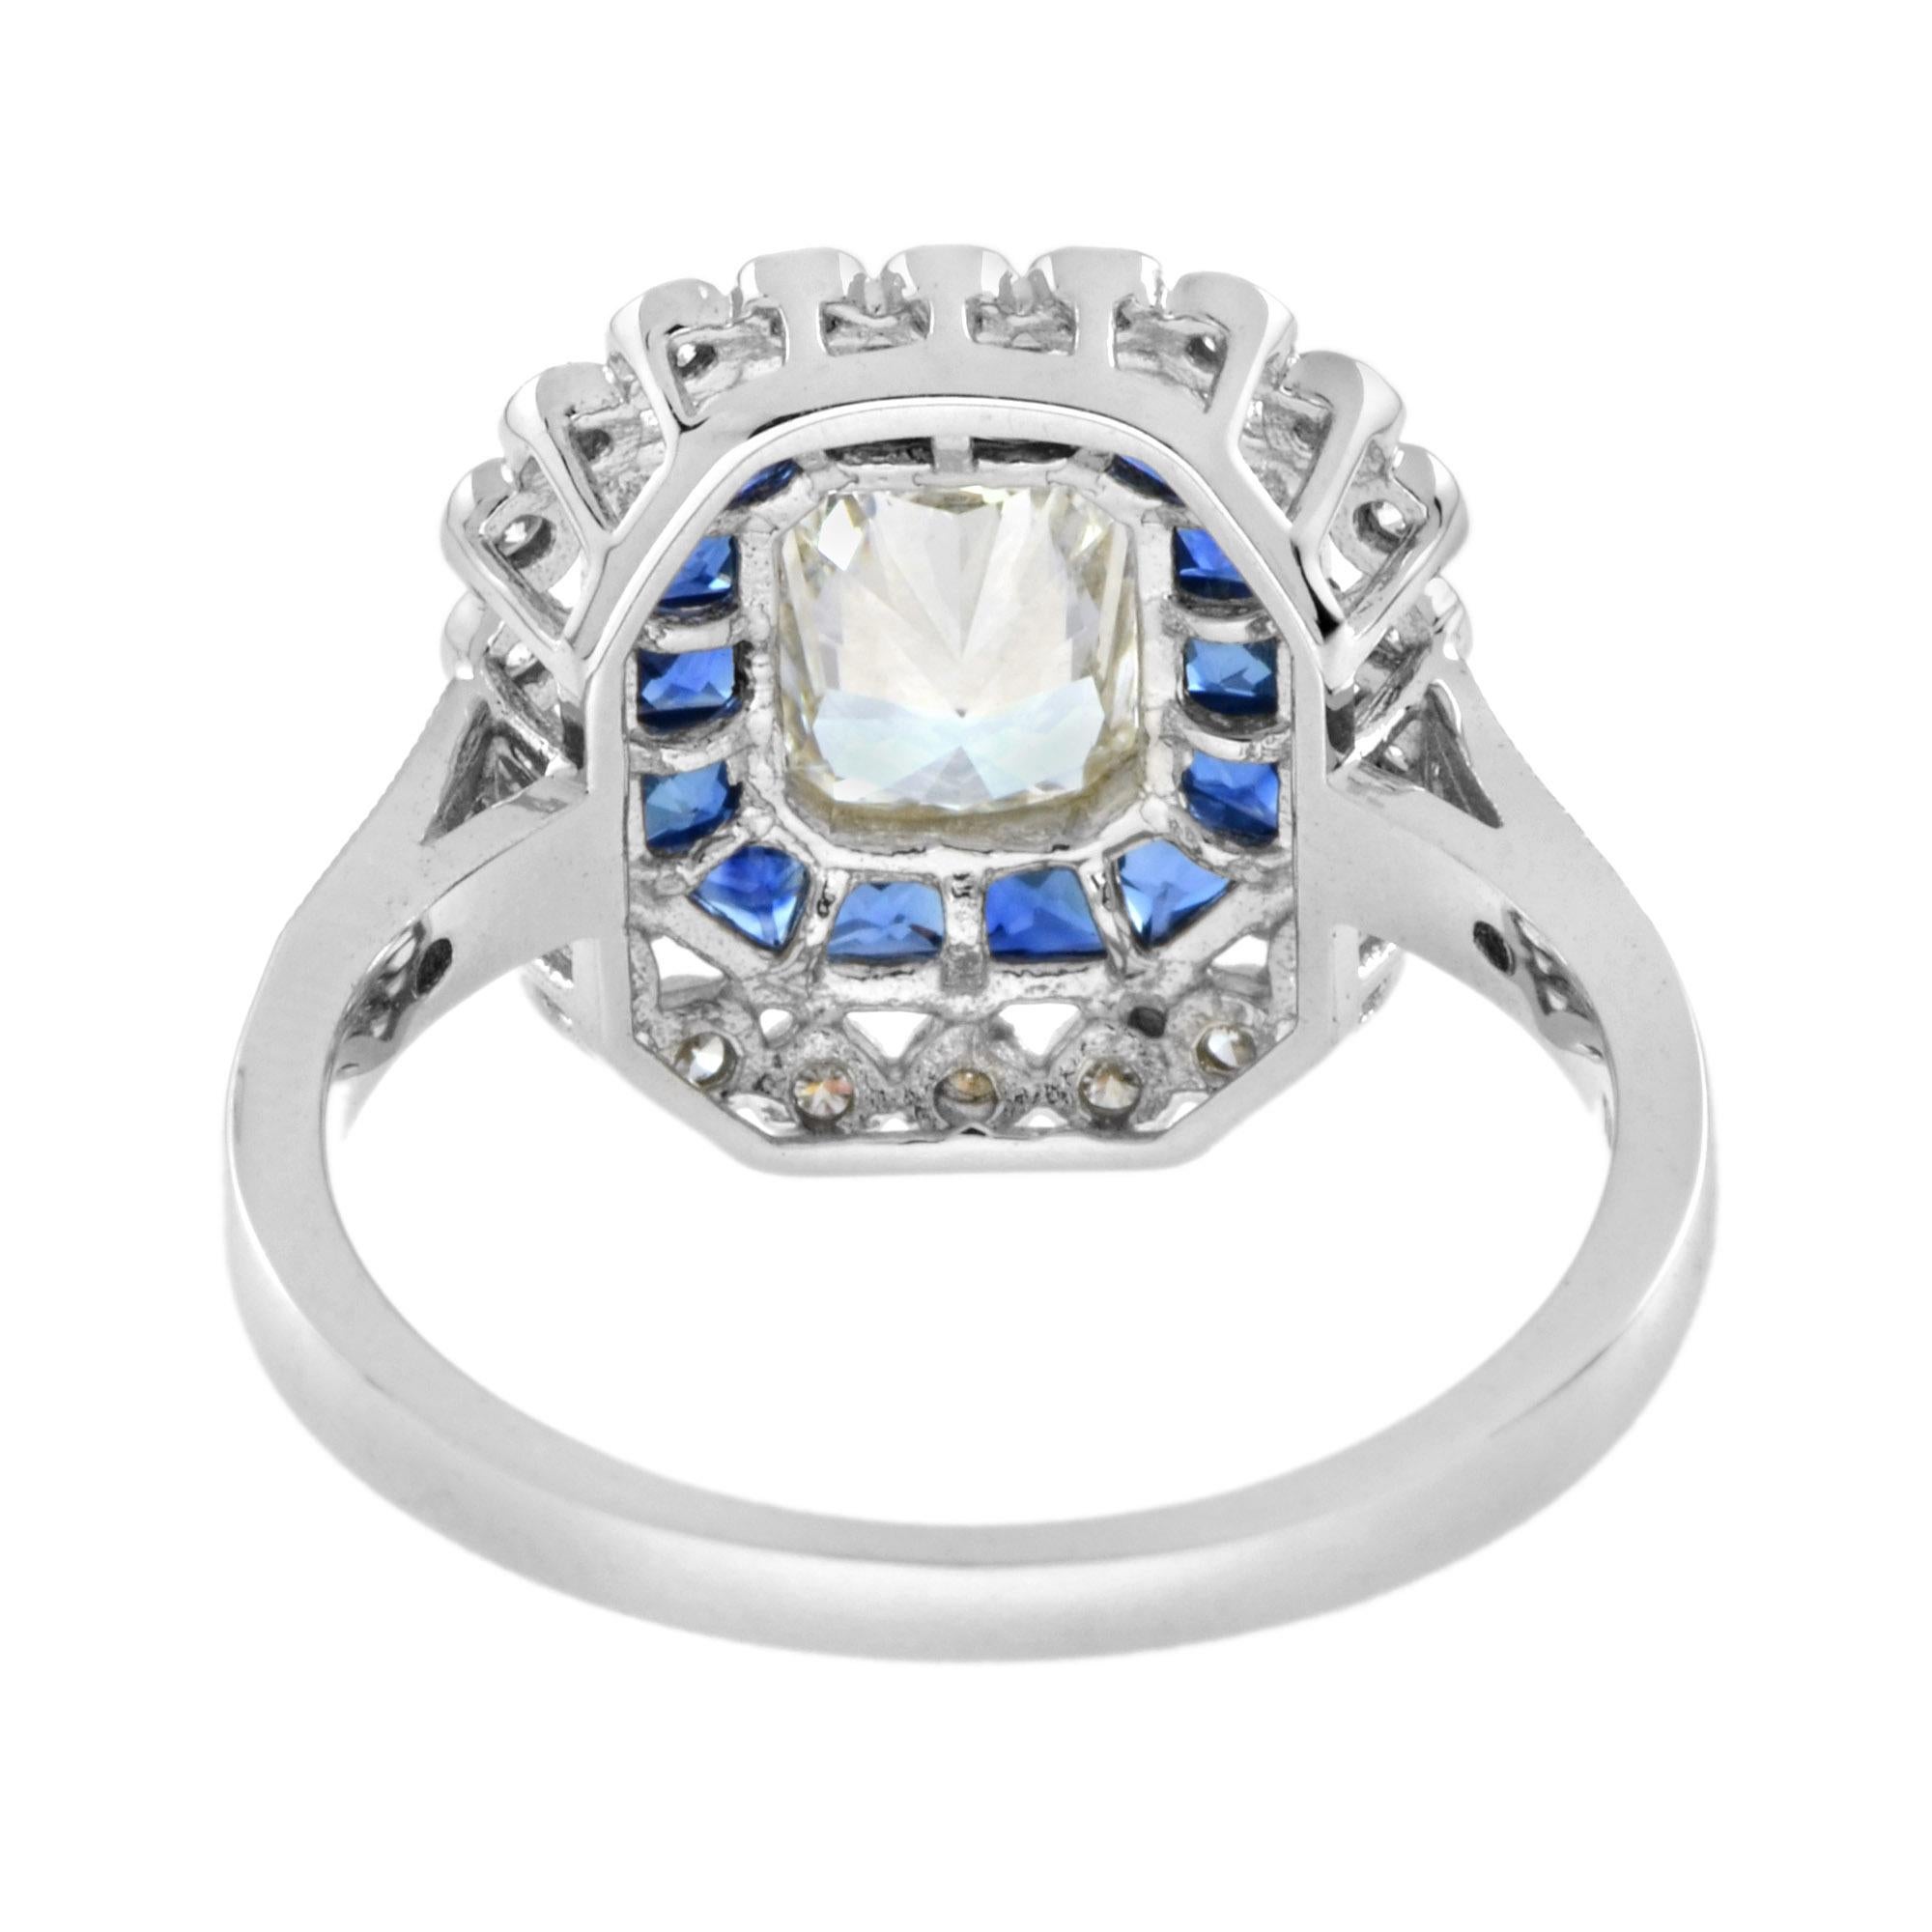 Women's GIA 1.04 Ct. Diamond Sapphire Art Deco Style Engagement Ring in 18K White Gold For Sale